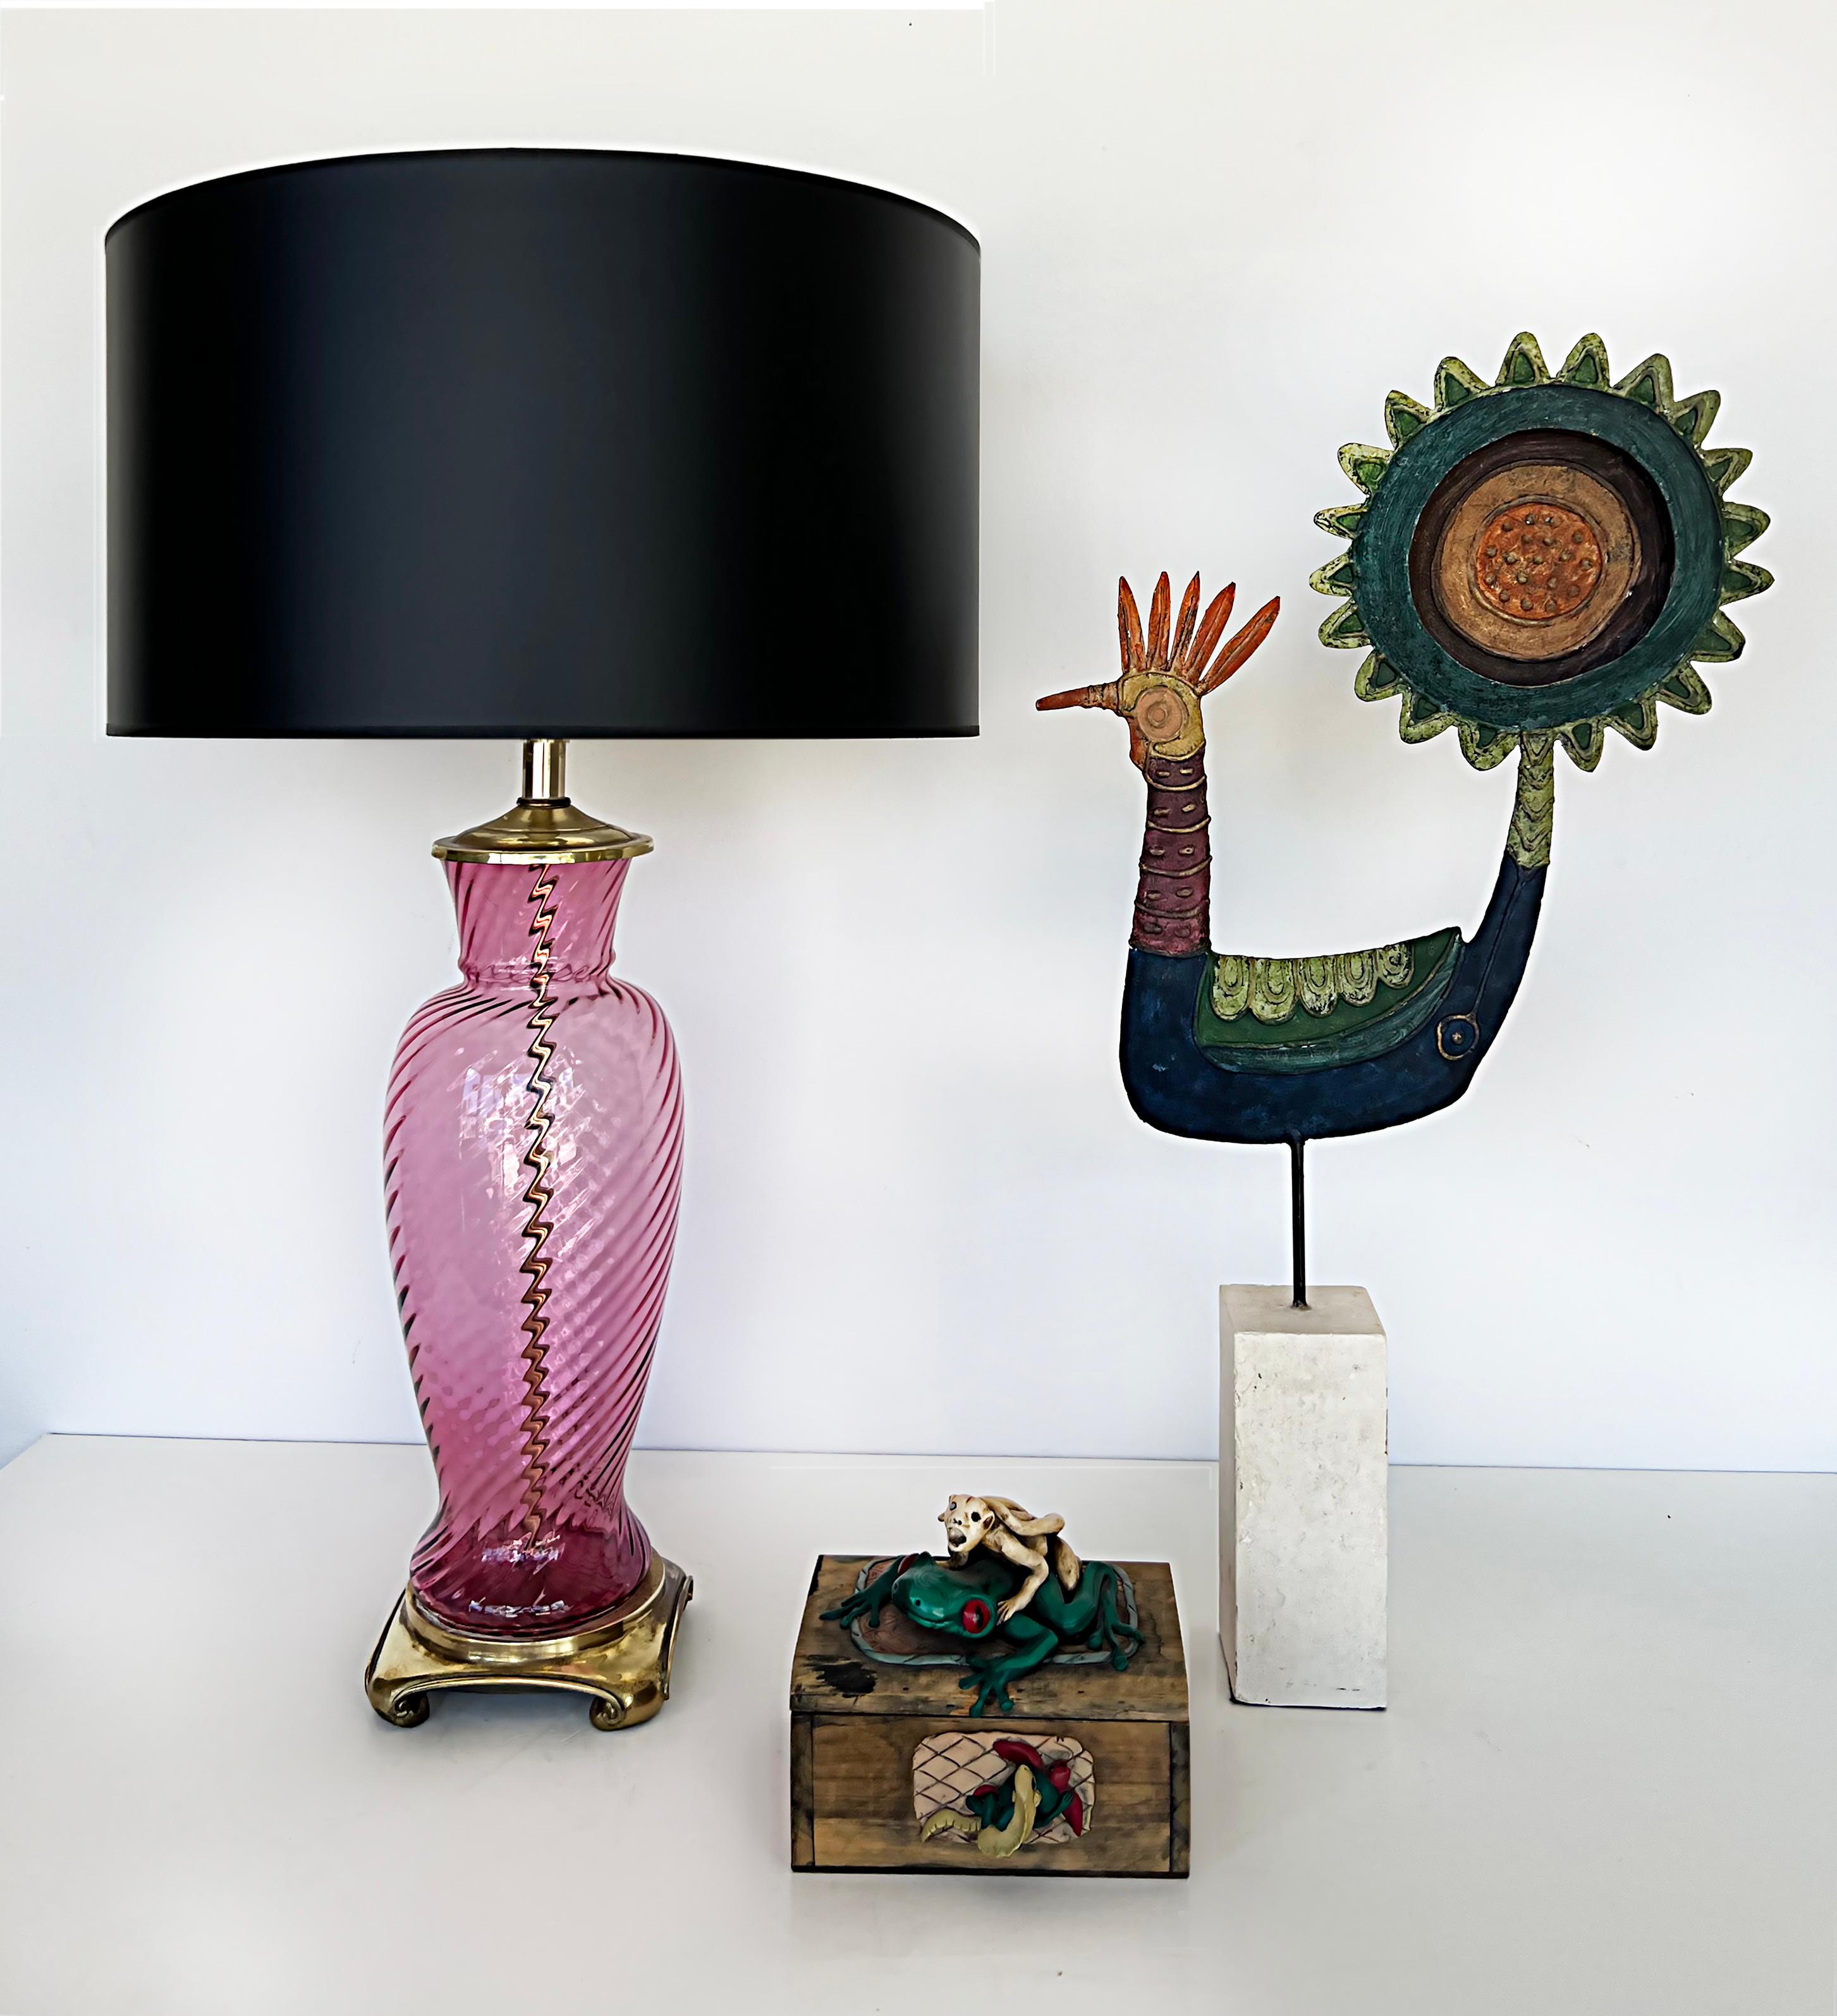 1950s Vintage pink murano glass table lamps, brass bases, pair.

Offered for sale is a pair of vintage pink swirl Murano glass lamps with a ridged texture. These circa 1950s lamps are presented upon solid brass bases and have brass fittings. The